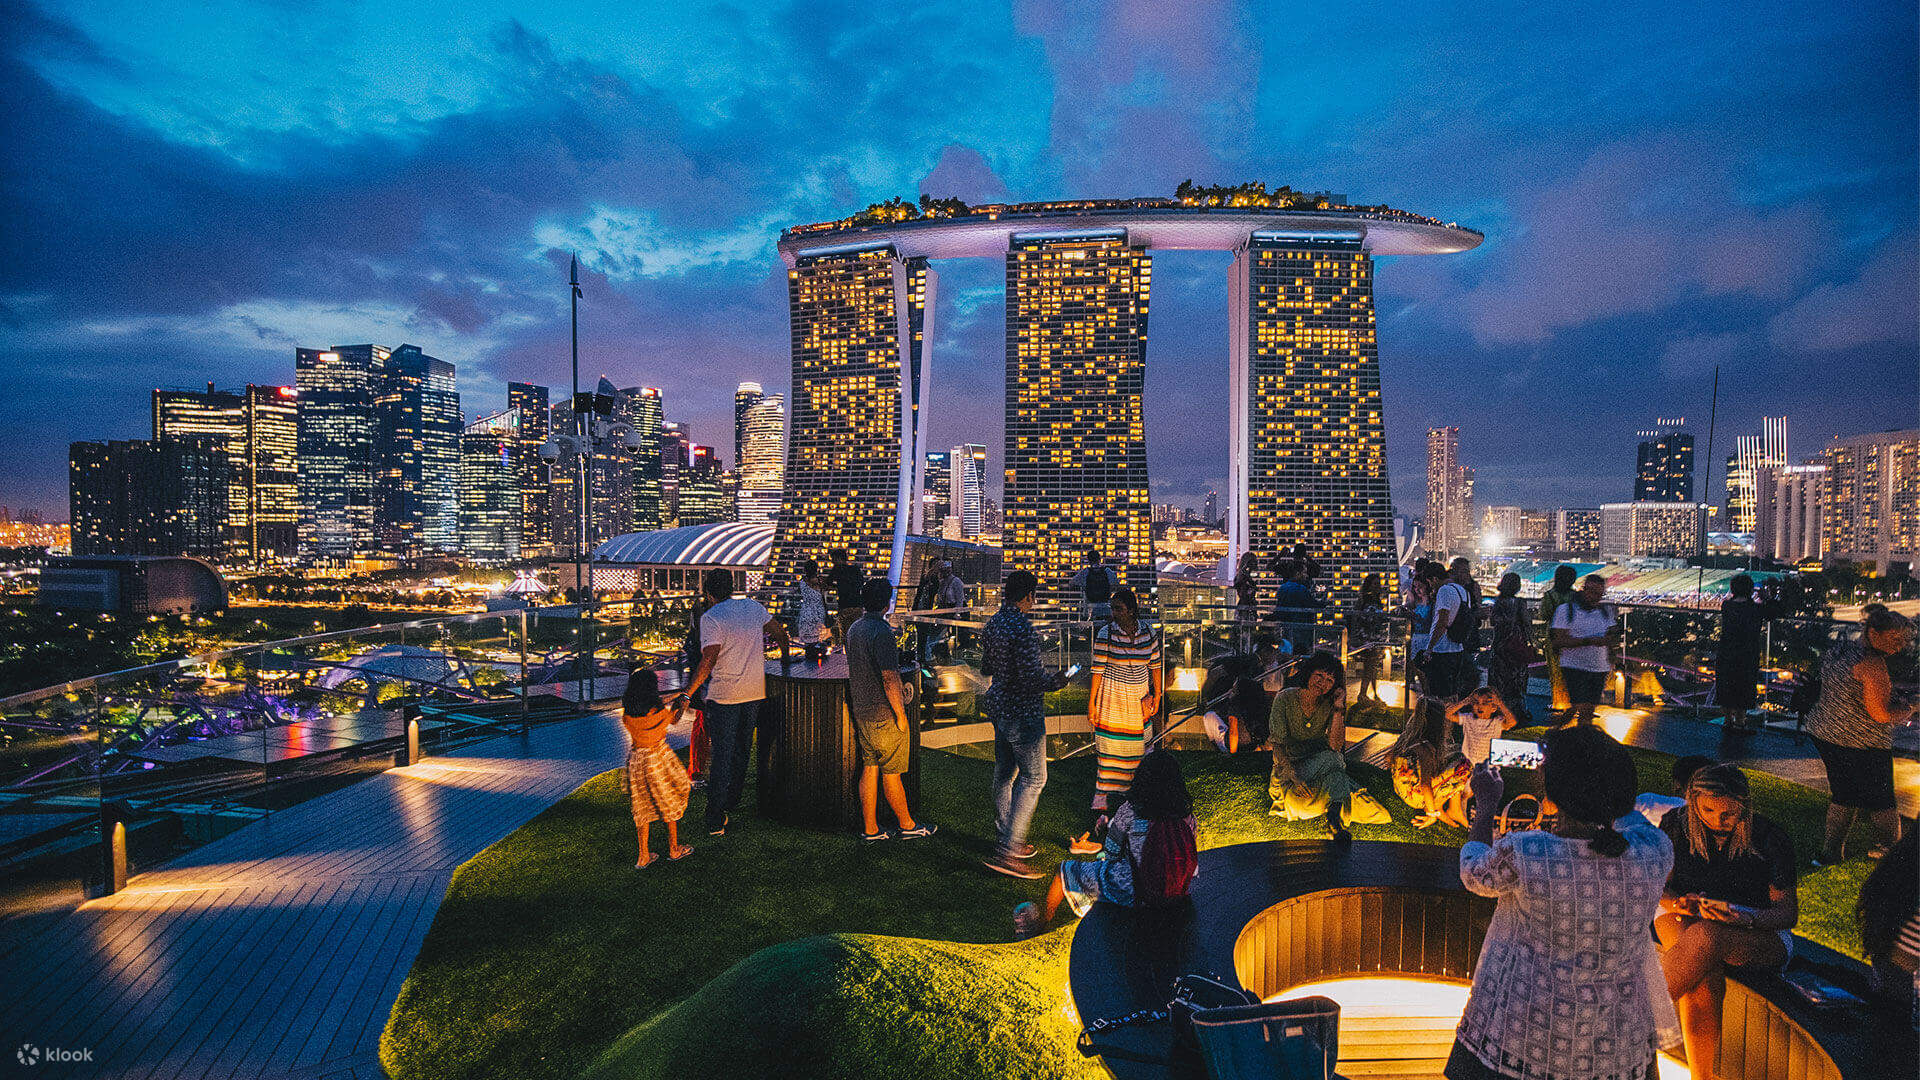 Singapore – Marina Bay Sands and Gardens by the Bay